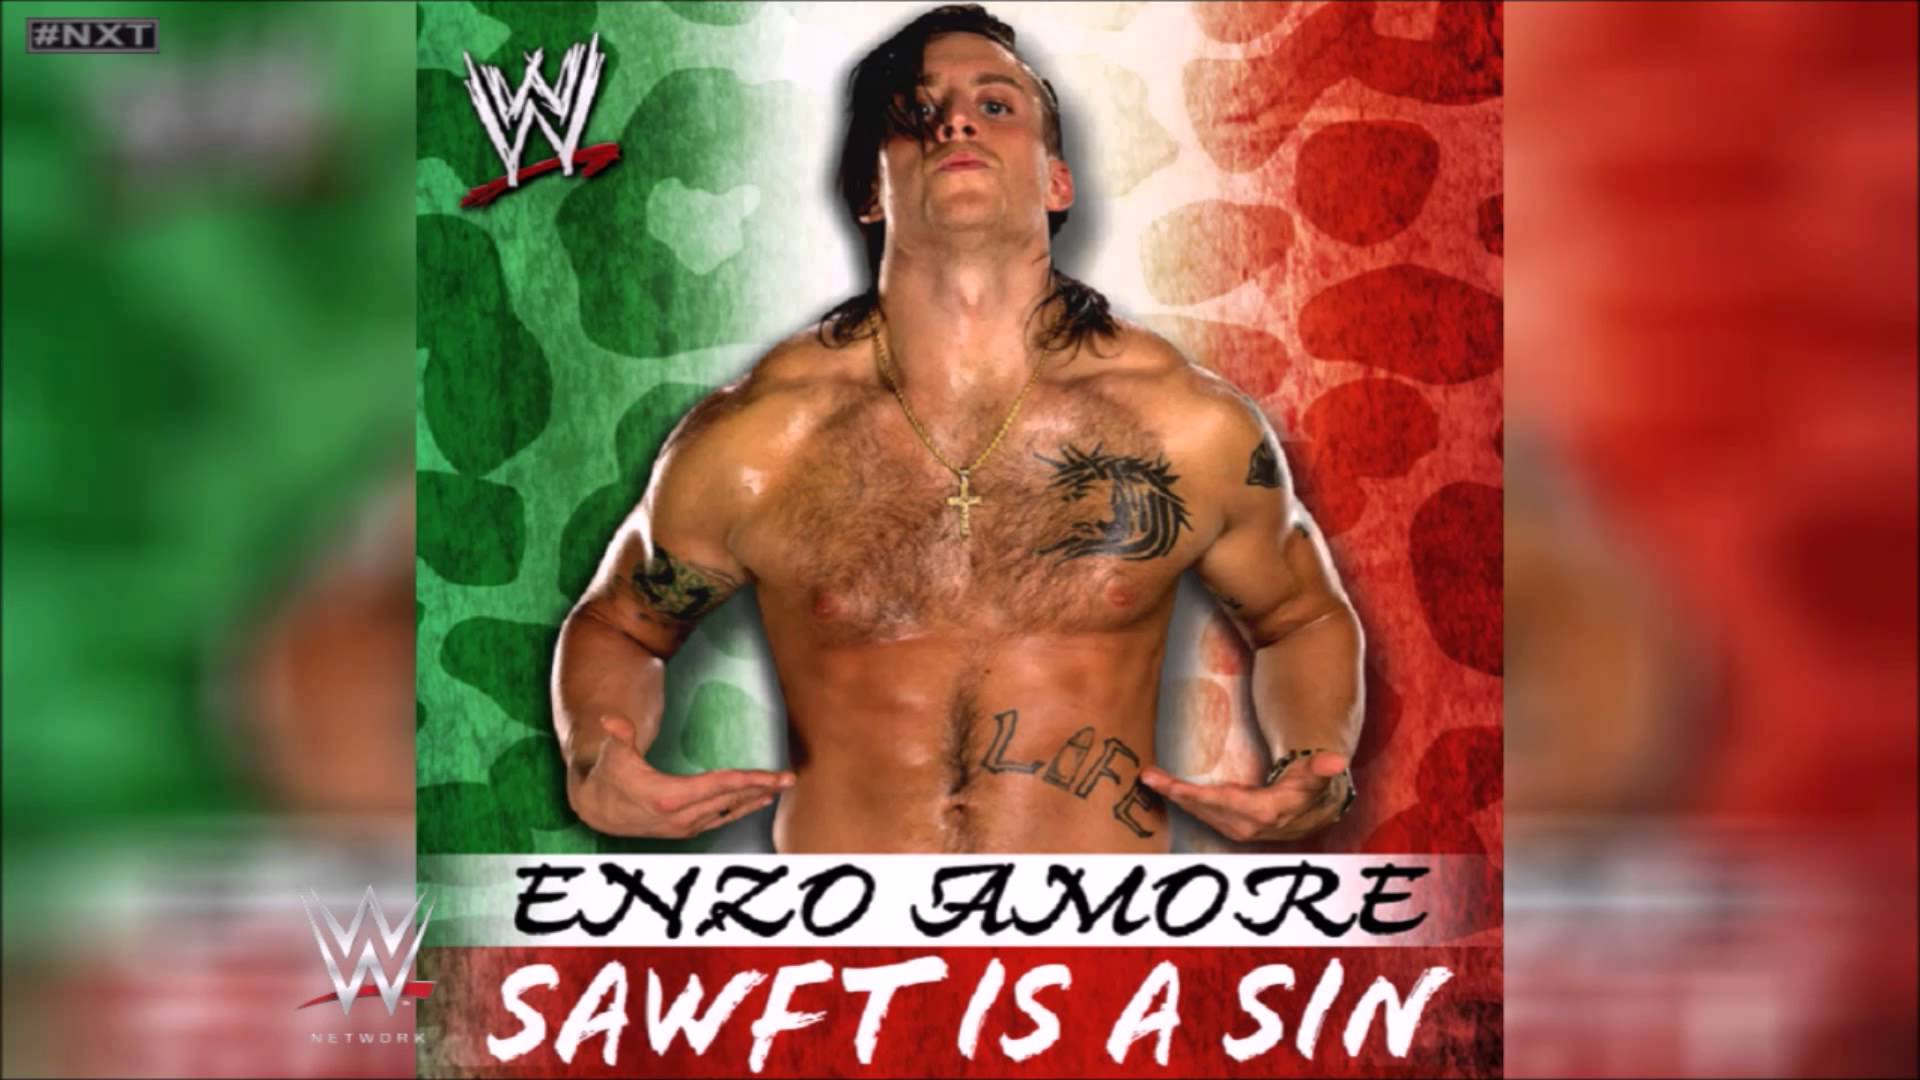 Enzo Amore 6th WWE Theme Song For 30 minutes Is a Sin